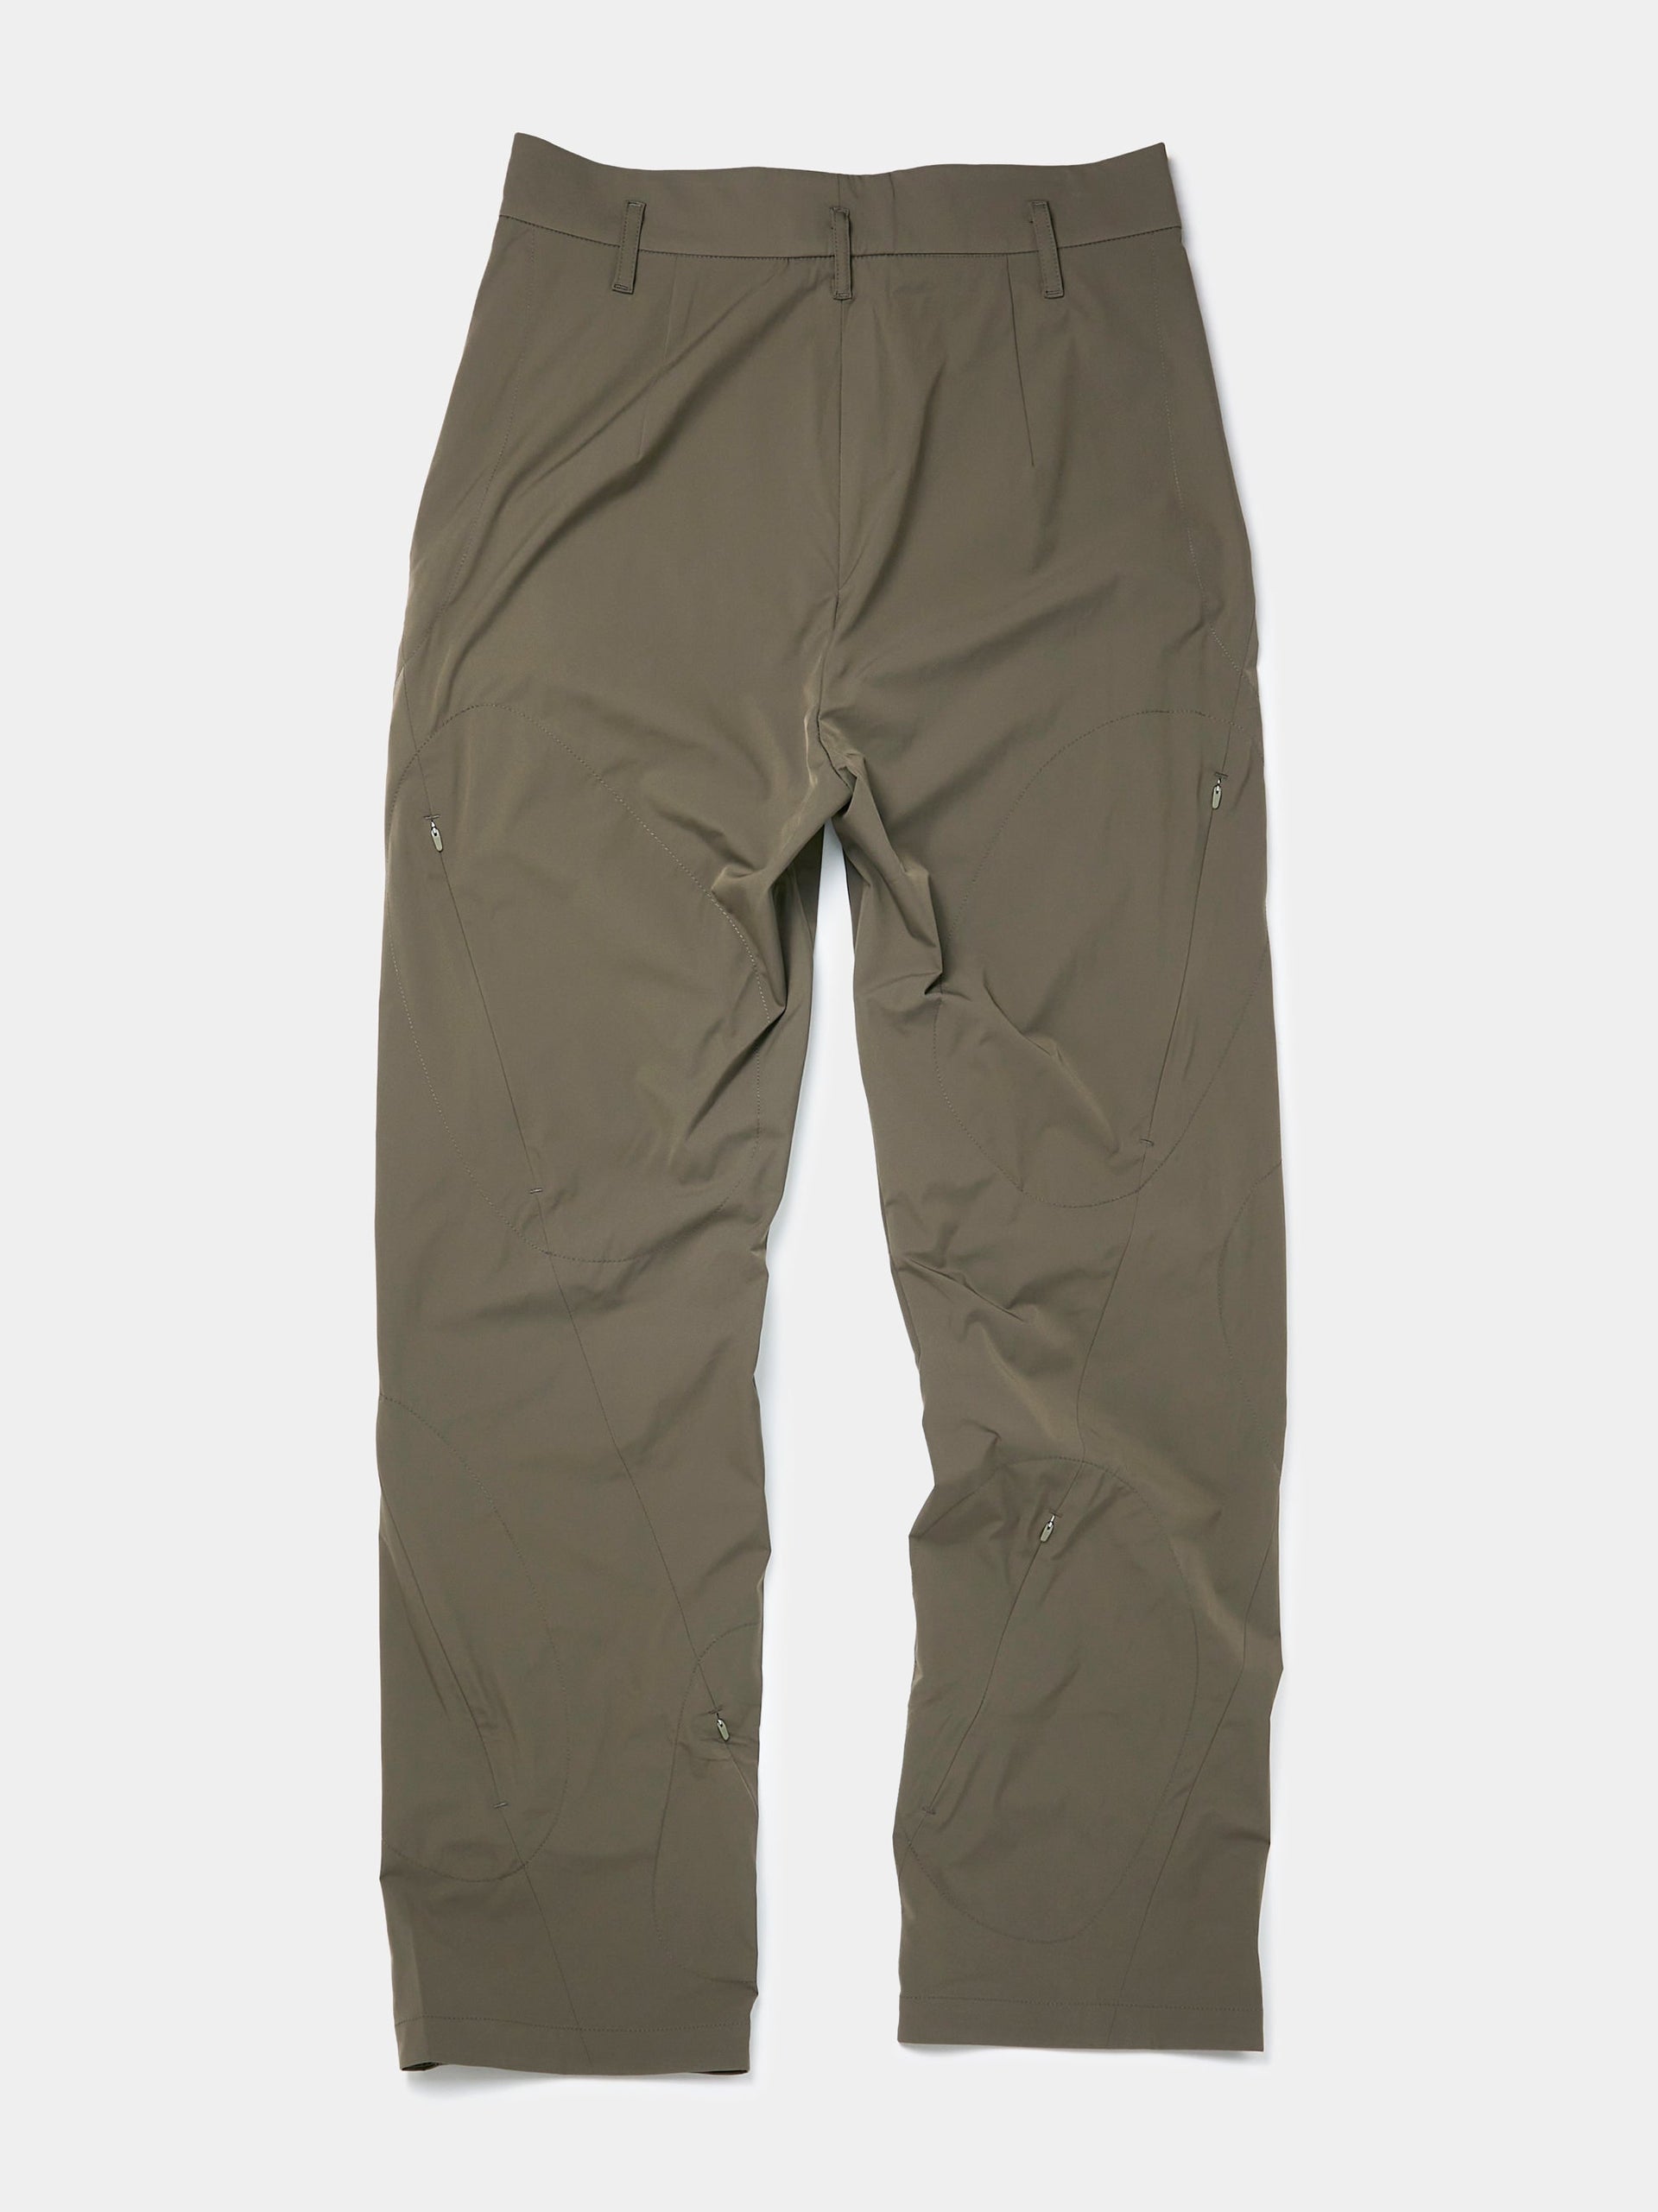 Buy Post Archive Faction 5.1 TROUSERS CENTER (Olive) Online at UNION LOS  ANGELES